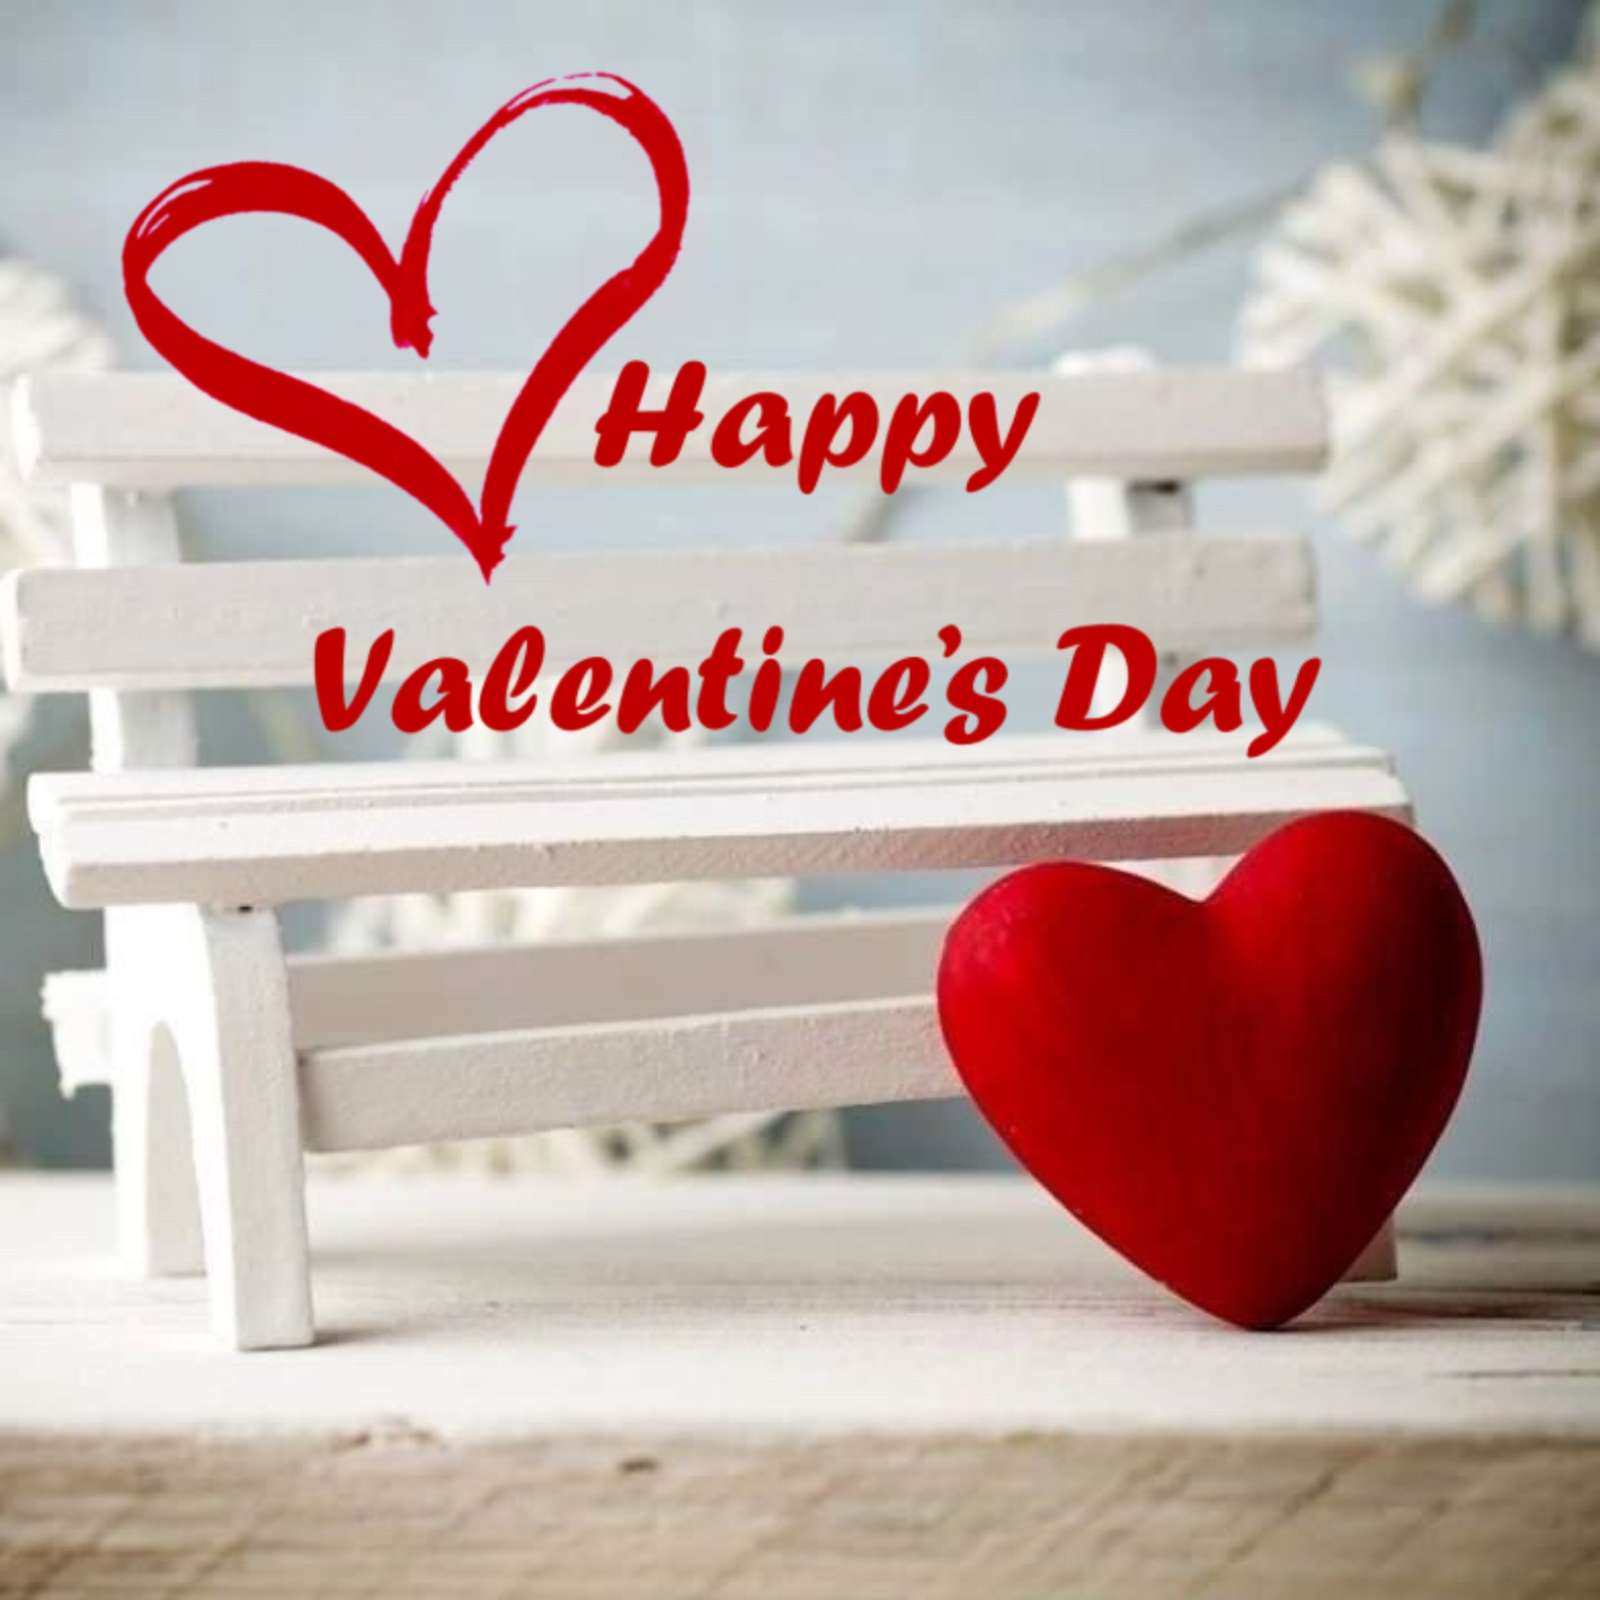 Happy Valentines Day Pictures Download